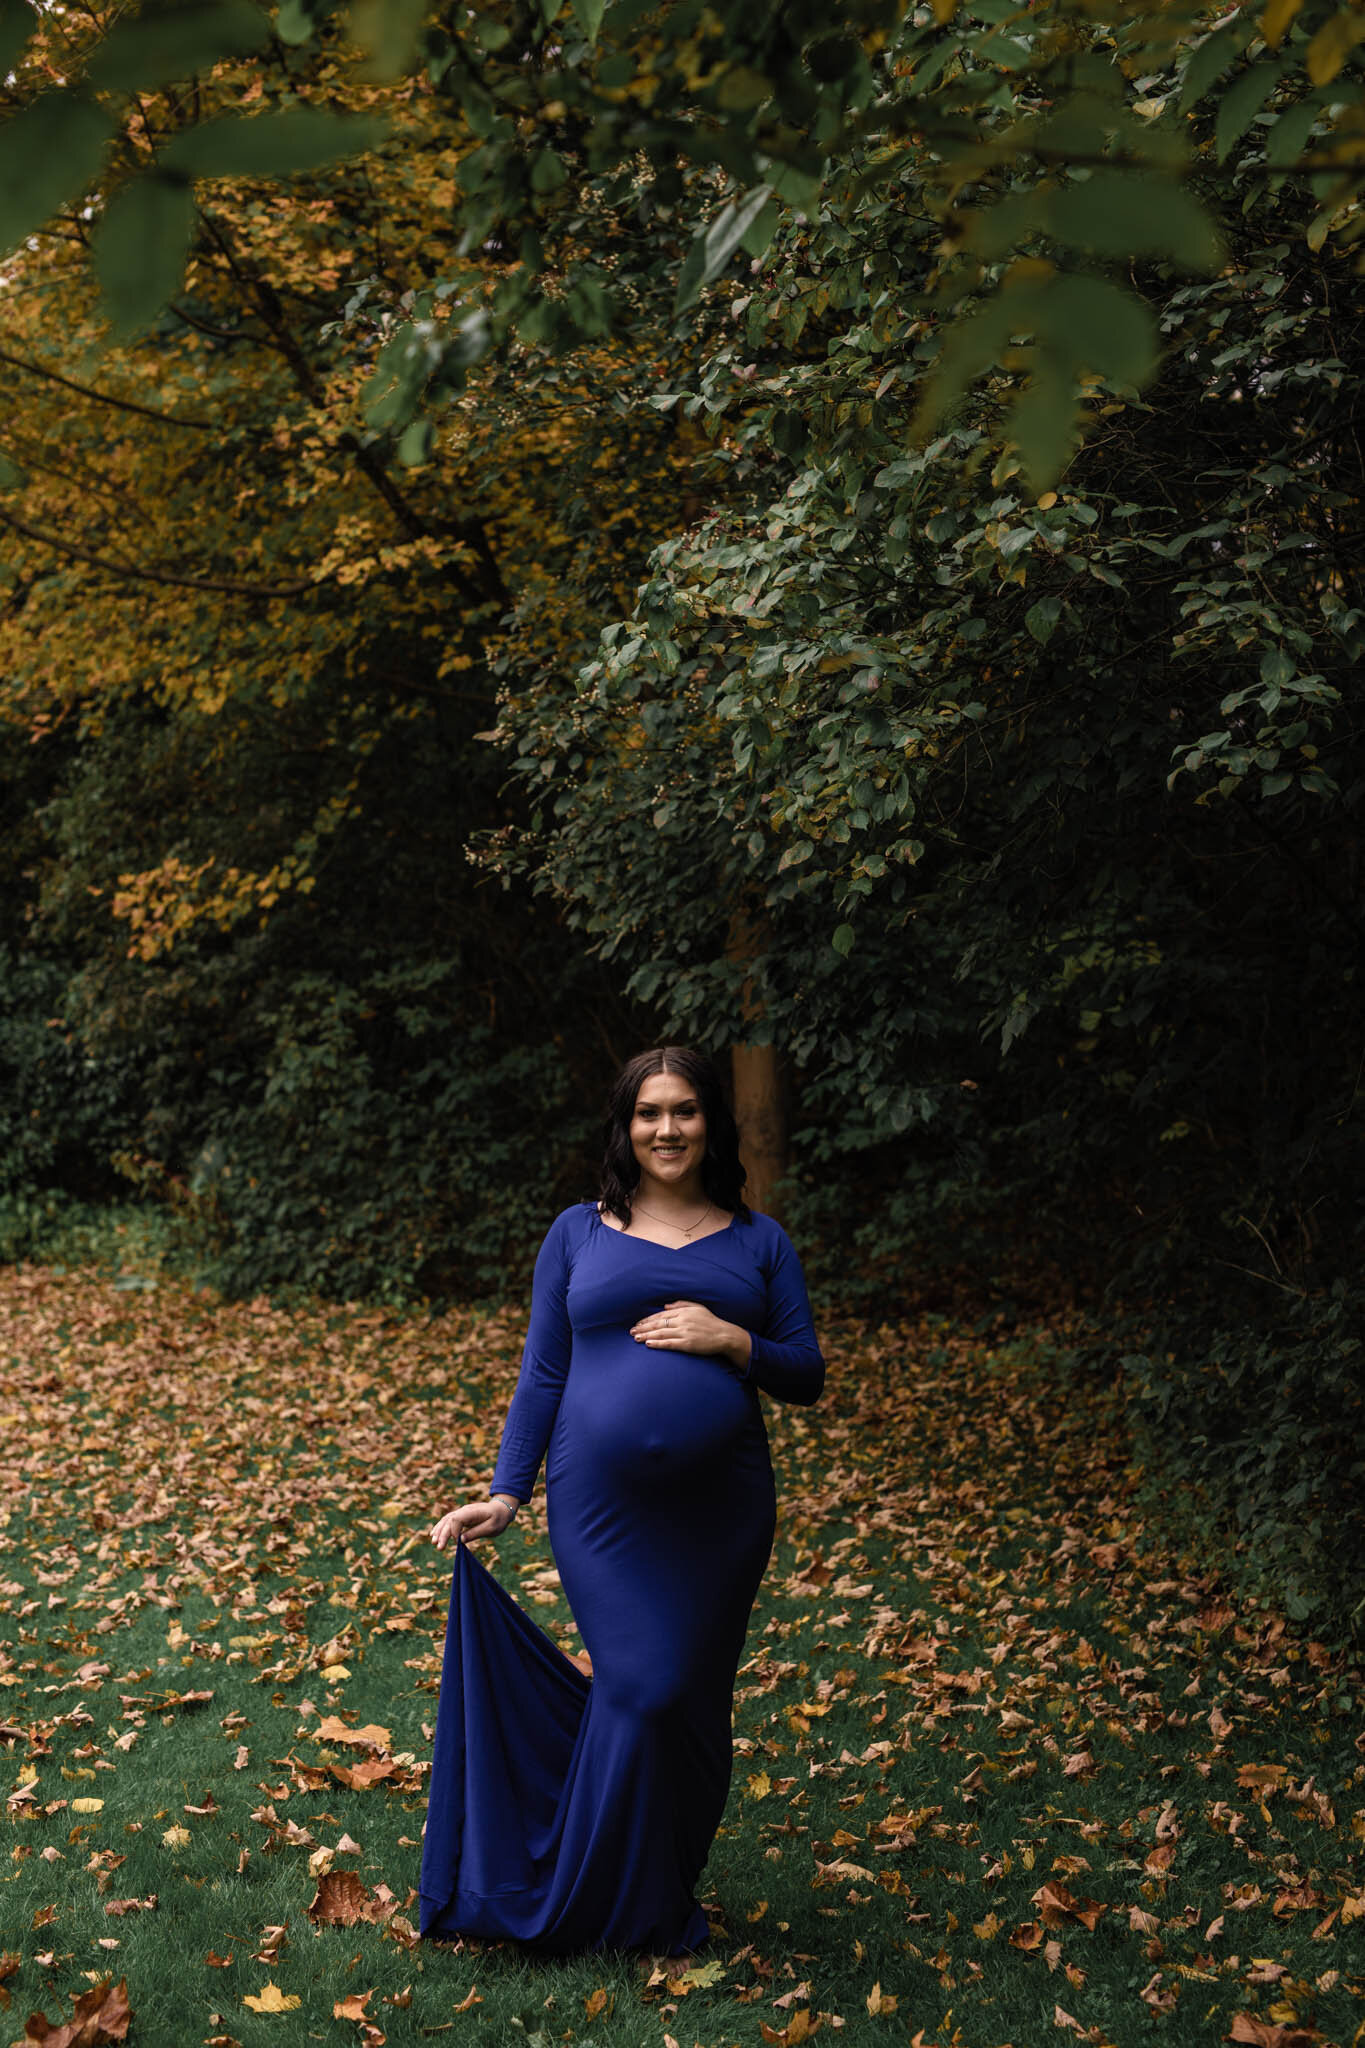 Forest_Maternity_Session_Elegant_Garden_Maternity_Gown_Photos_Baby_Boy_Millcreek_Park_in_Youngstown_Ohio_by_Newborn_Photographer_Christie_Leigh_Photo_Mahoning_County_OH-4.jpg